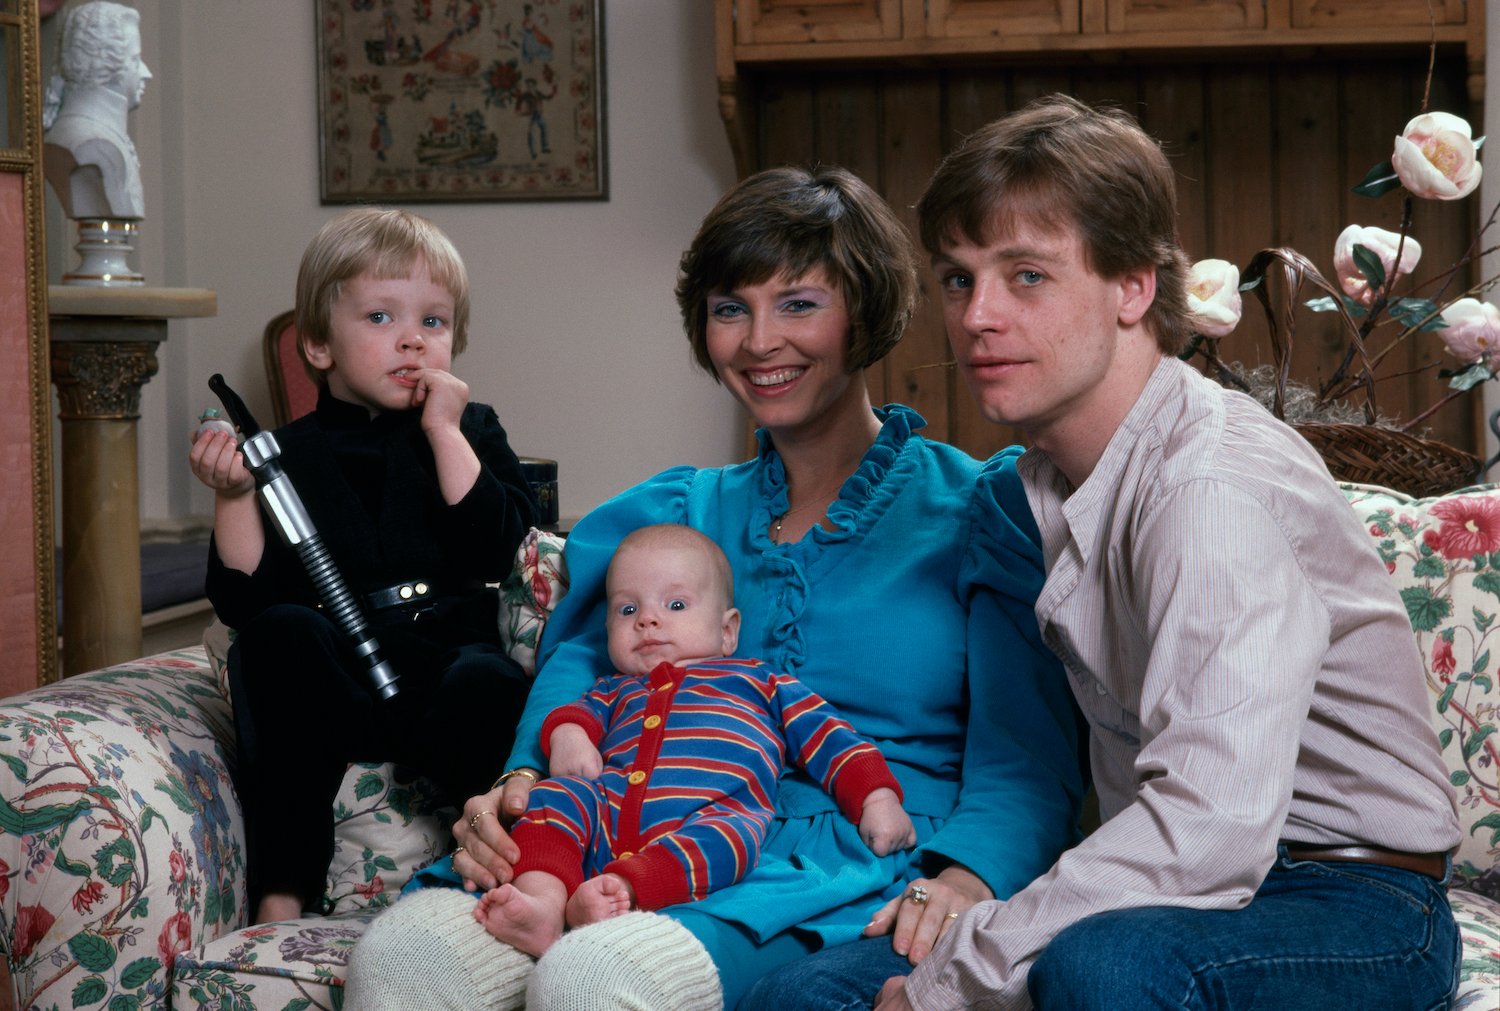 American actor Mark Hamill, his wife Marilou York, and their sons Nathan and Griffin at their home in Los Angeles